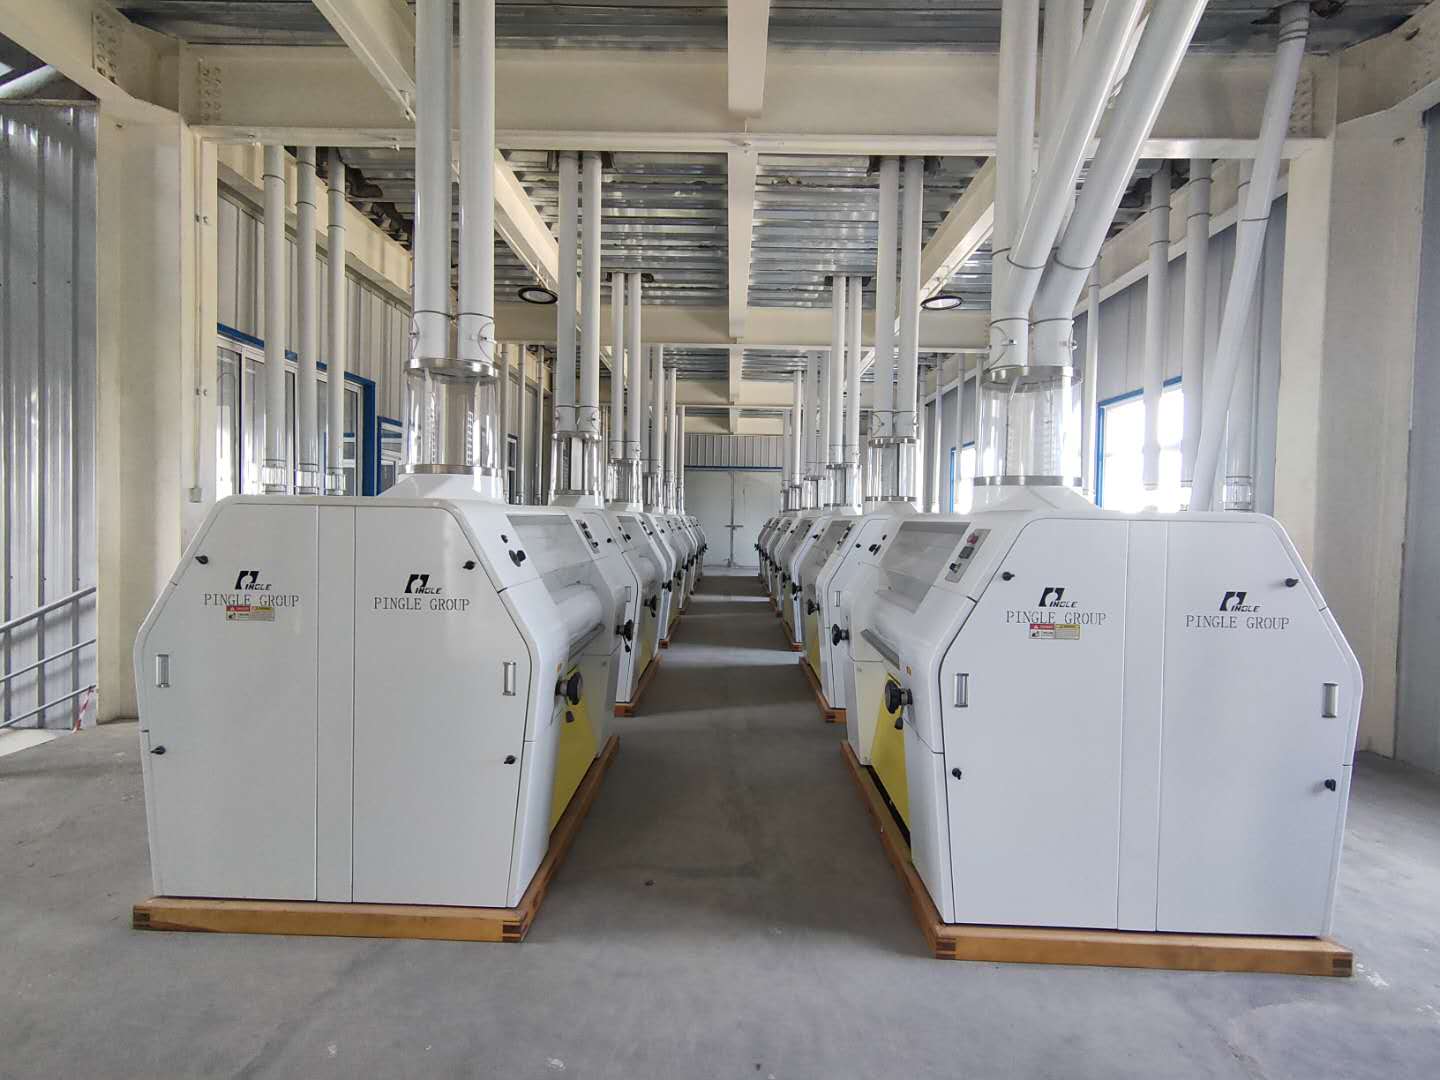 The purifier is one of the main equipment in the wheat factory. This purifier is suitable for purifying and classifying semolina, medium semolina and wheat flour. Widely used in wheat, corn and corn flour mills.